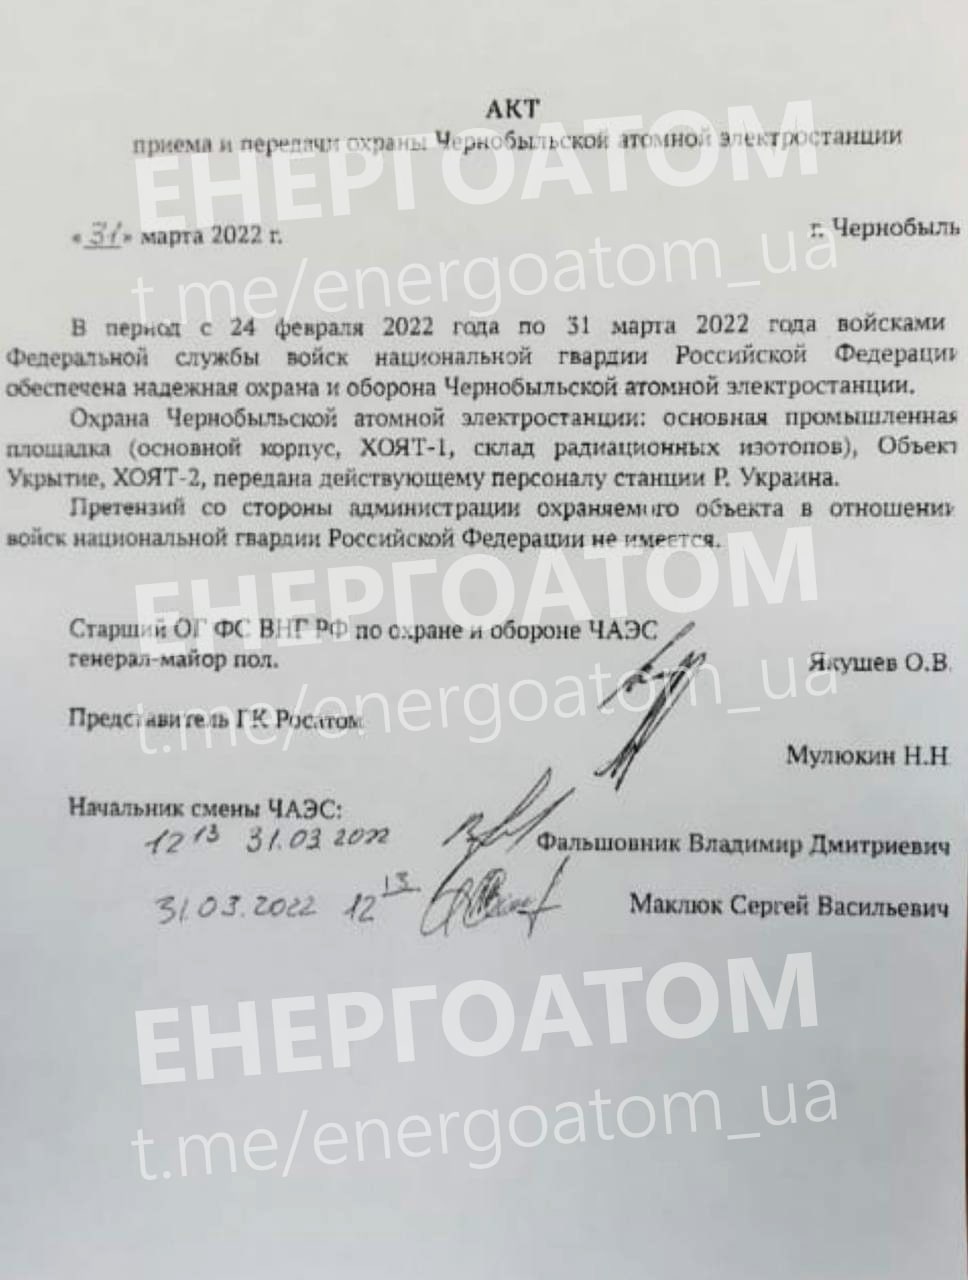 The paper the Russian occupiers had handed over to Chernobyl NPP executives before they began withdrawing their forces from the site / Photo credit: Energoatom